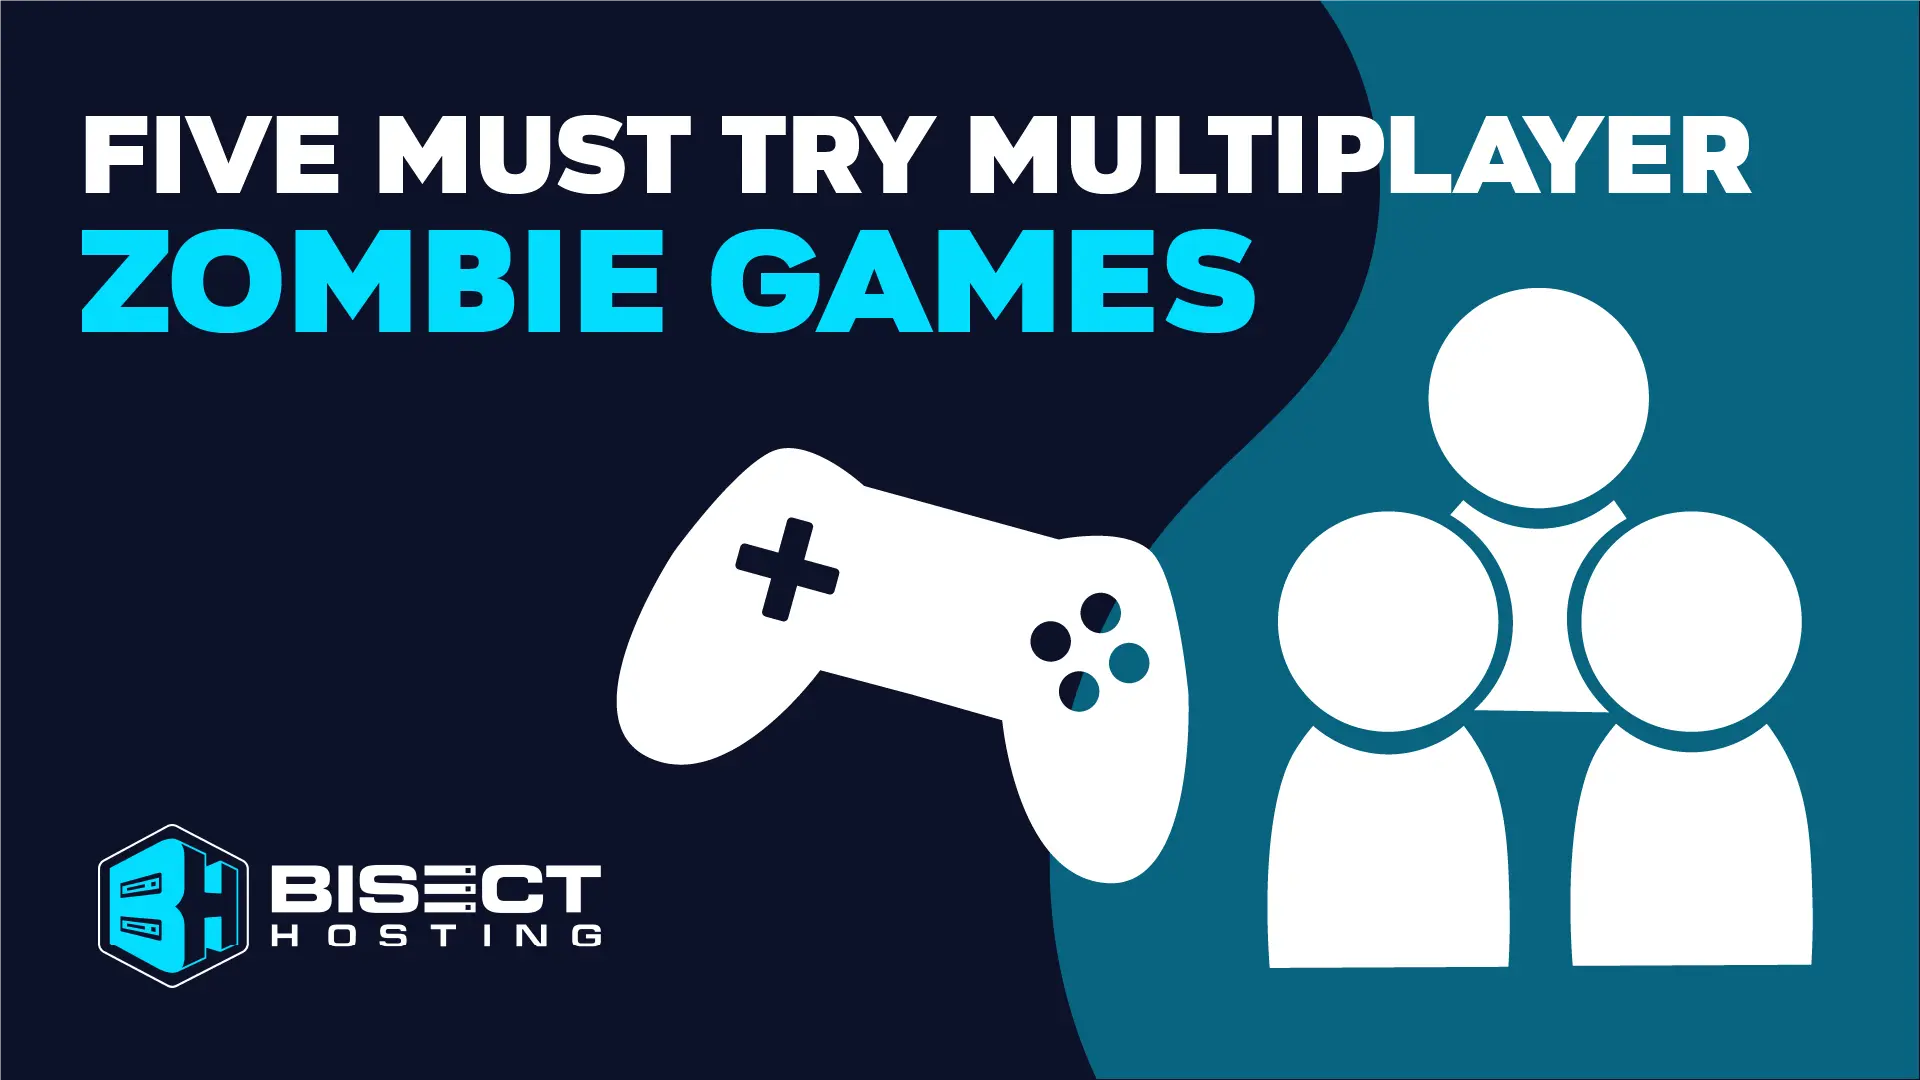 Five Must Try Multiplayer Zombie Games